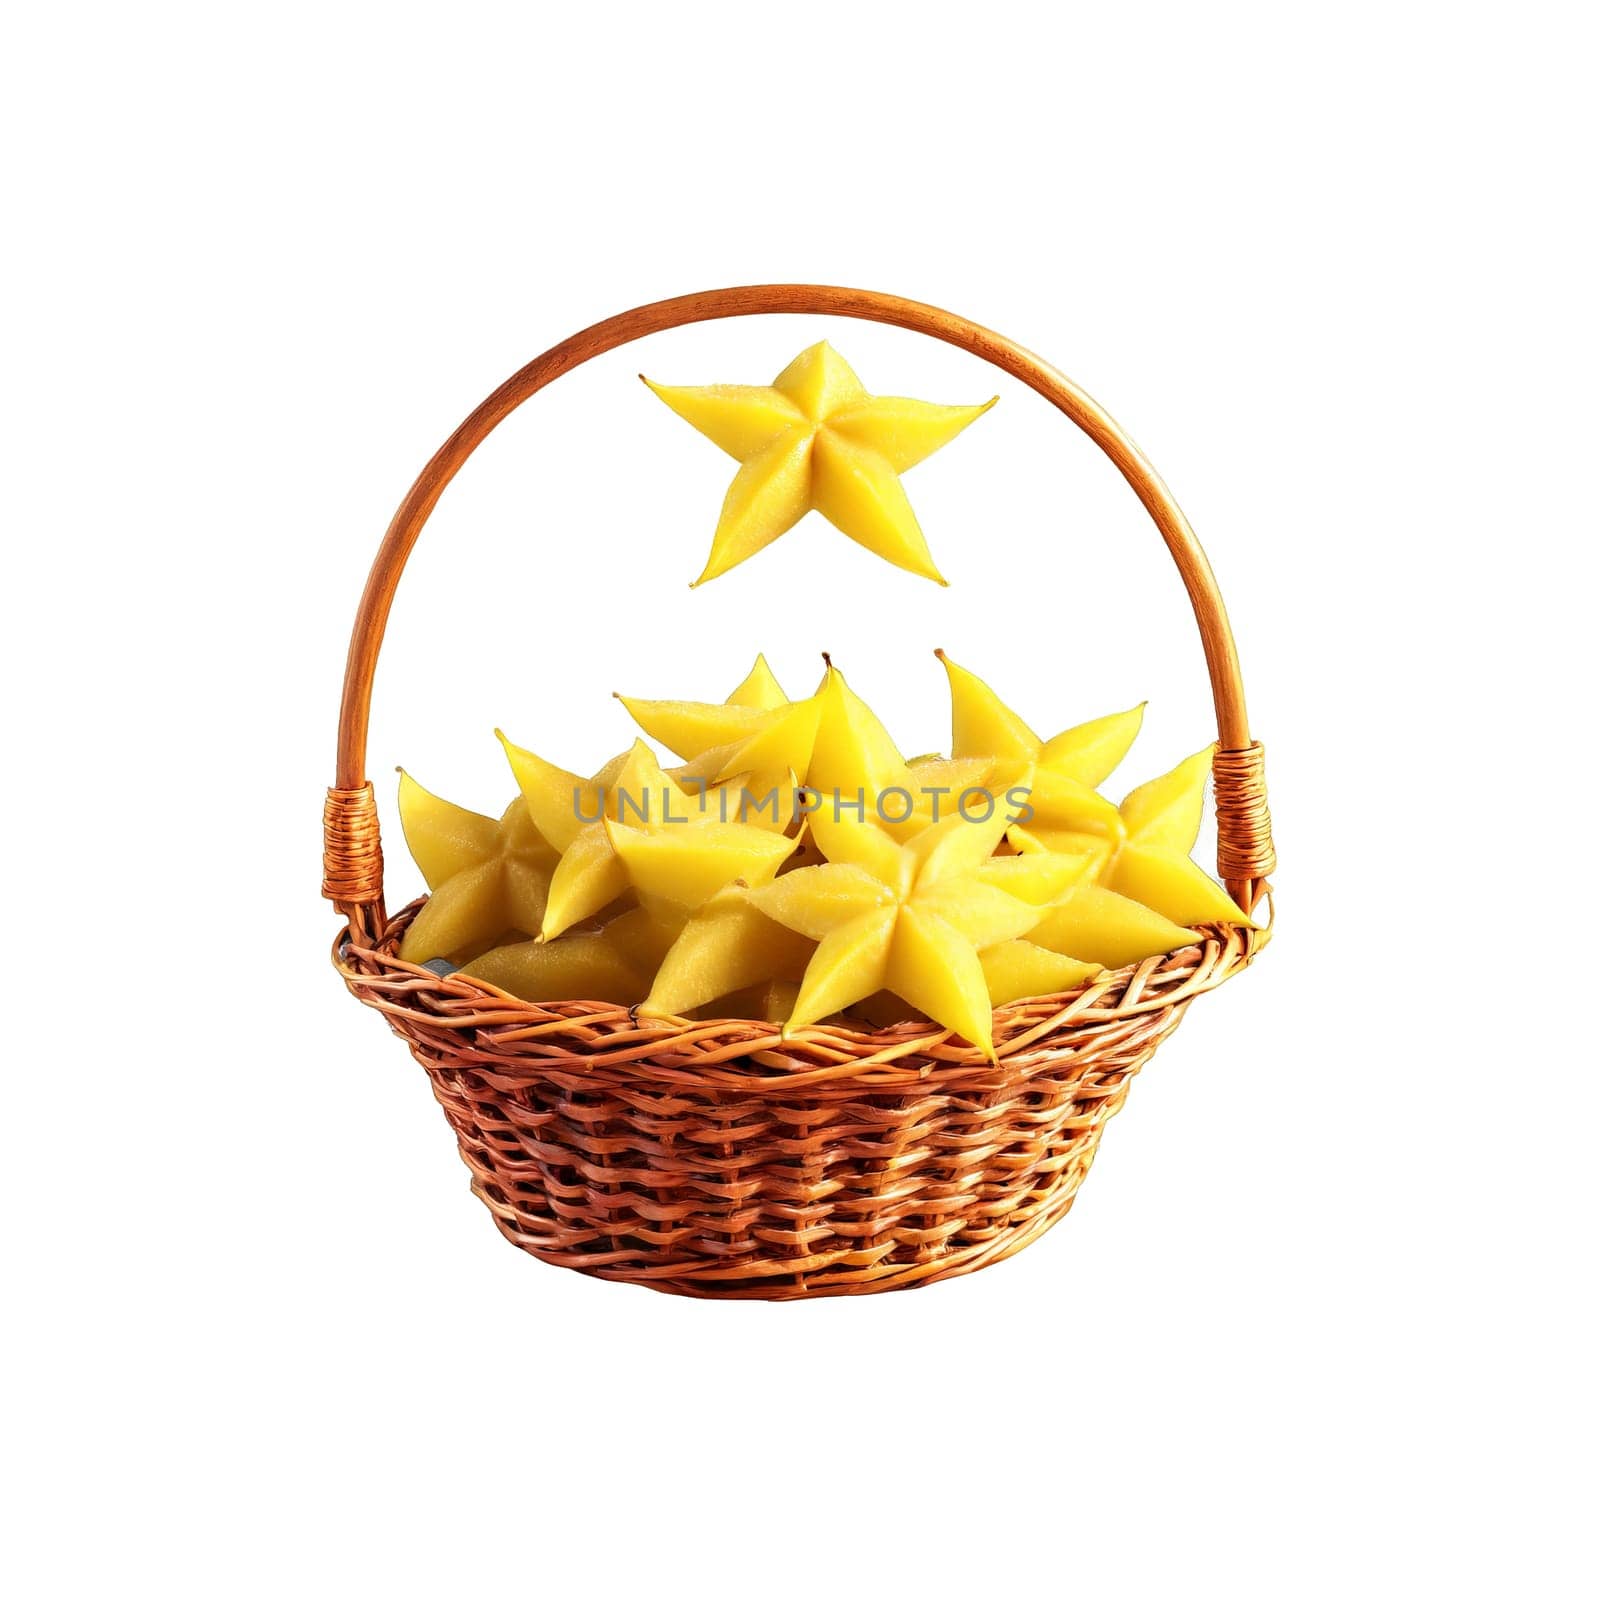 Starfruit averrhoa carambola yellow whole and sliced whirling over vintage wicker basket misty air Food by panophotograph